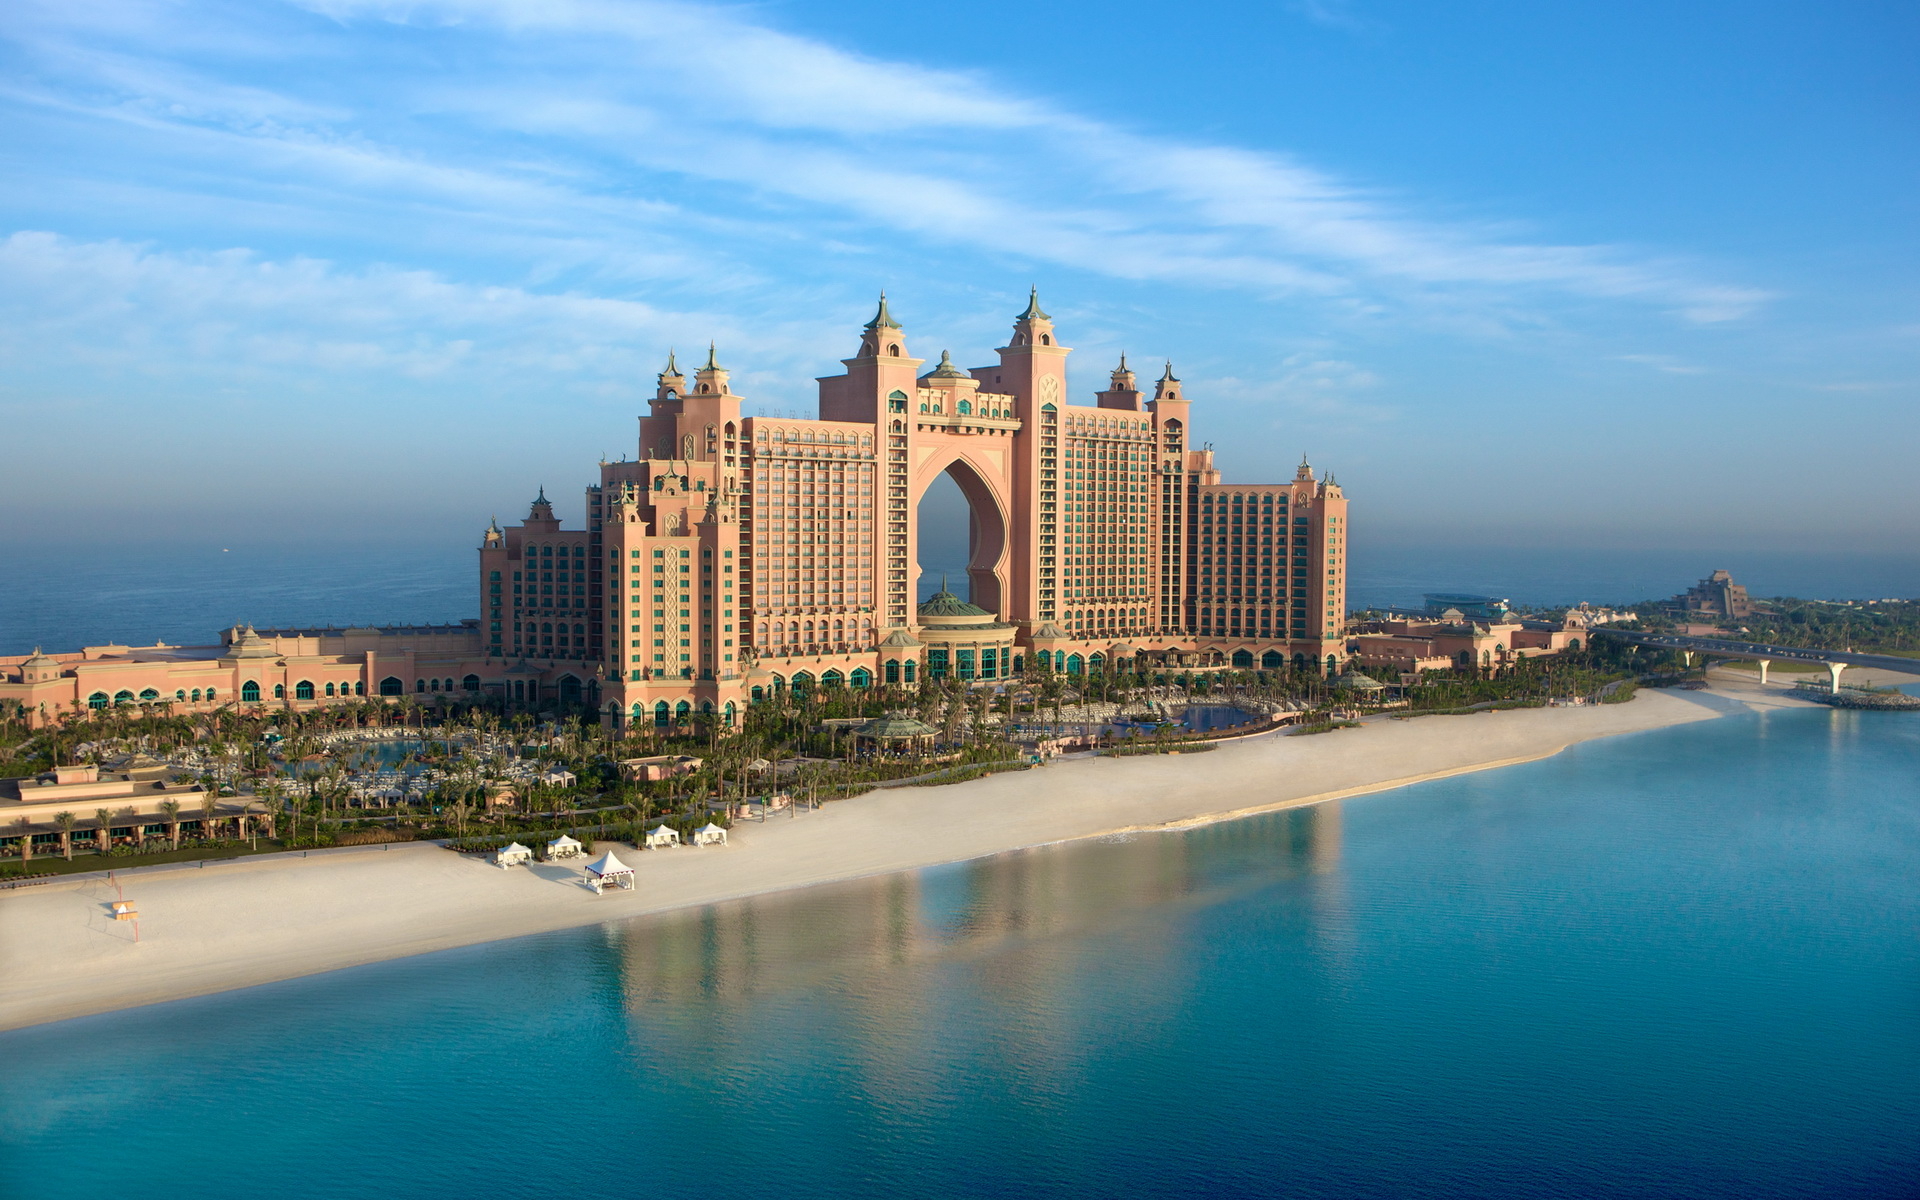 Dubai. Jumeirah. hotel wallpapers and images - wallpapers, pictures, photos